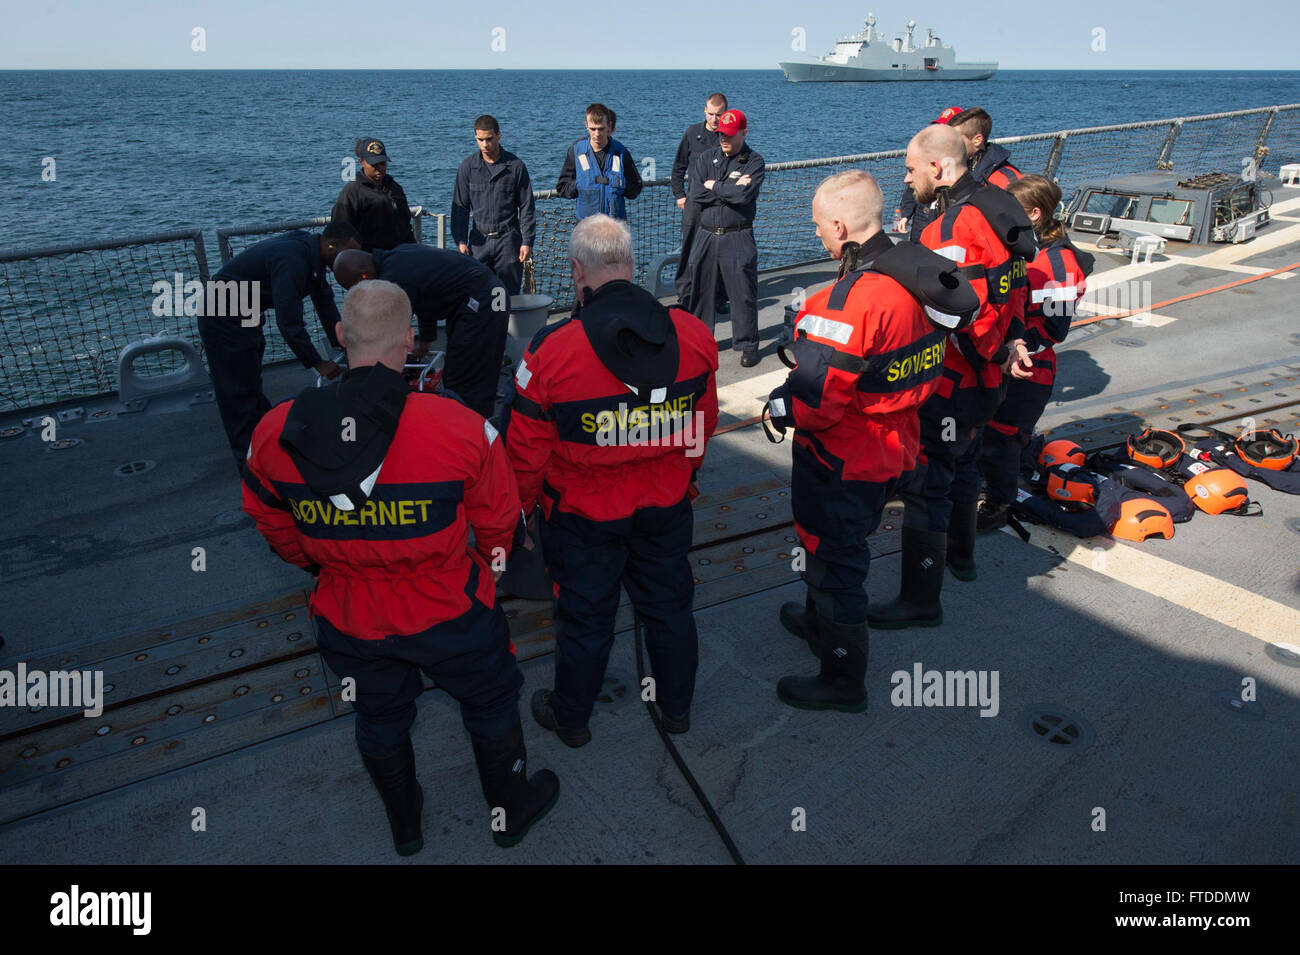 150613-N-ZE250-018 BALTIC SEA (June 13, 2015) Danish Navy sailors from the HDMS Absalon (L16) observe U.S. Sailors setting up a P-100 firefighting pump on the flight deck of USS Jason Dunham (DDG 109) June 13, 2015. Jason Dunham, an Arleigh Burke-class guided-missile destroyer homeported in Norfolk, is participating in exercise Baltic Operations (BALTOPS) 2015. BALTOPS is an annually recurring multinational exercise designed to enhance flexibility and interoperability, as well as demonstrate resolve of Allied and partner forces to defend the Baltic region. (U.S. Navy photo by Mass Communicatio Stock Photo